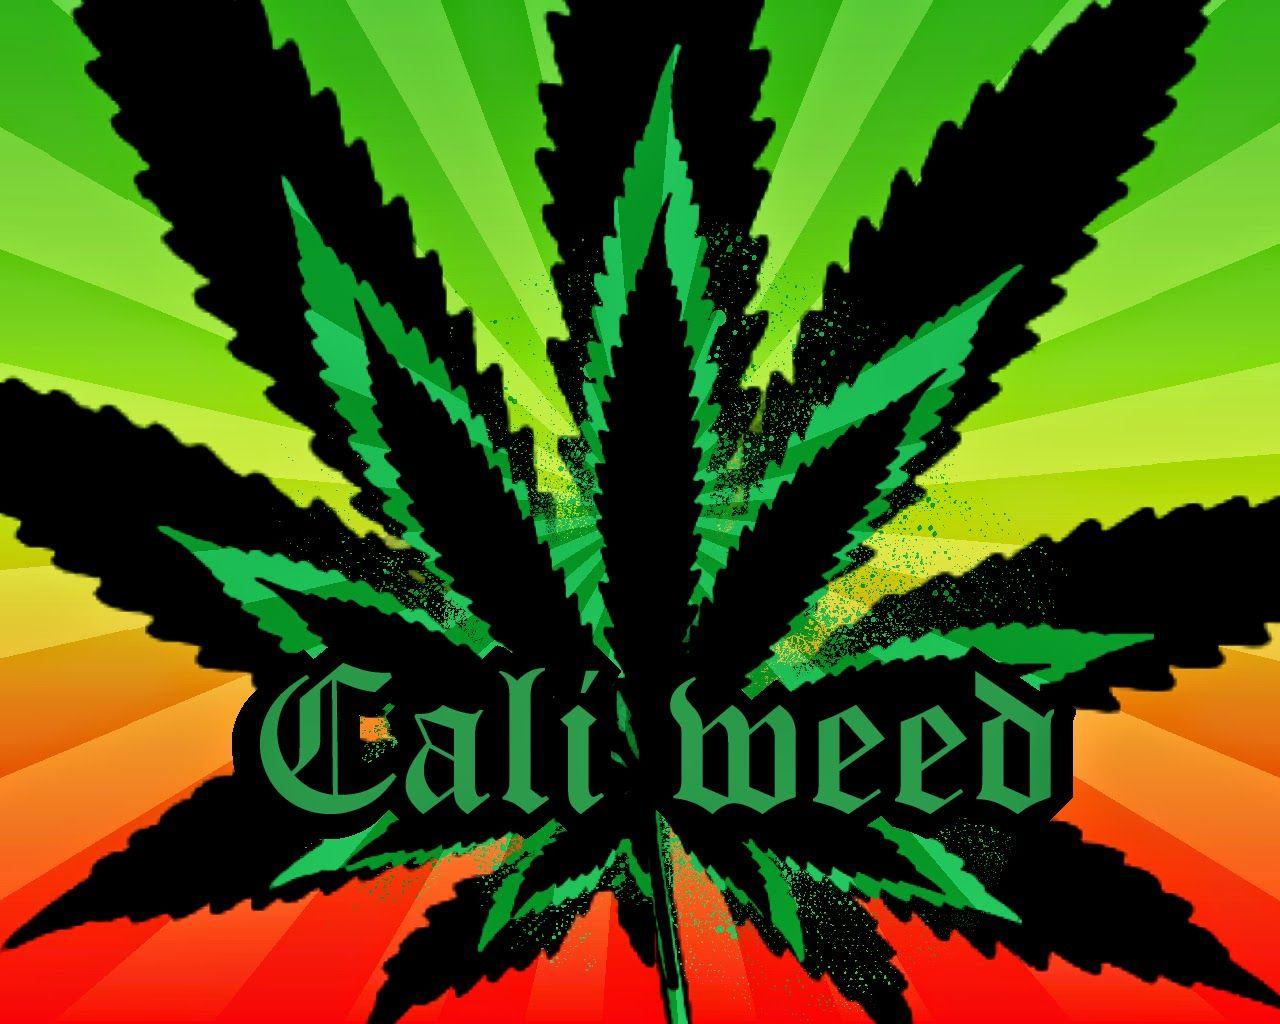 Tv show weeds Purple weed picture Weed wallpaper